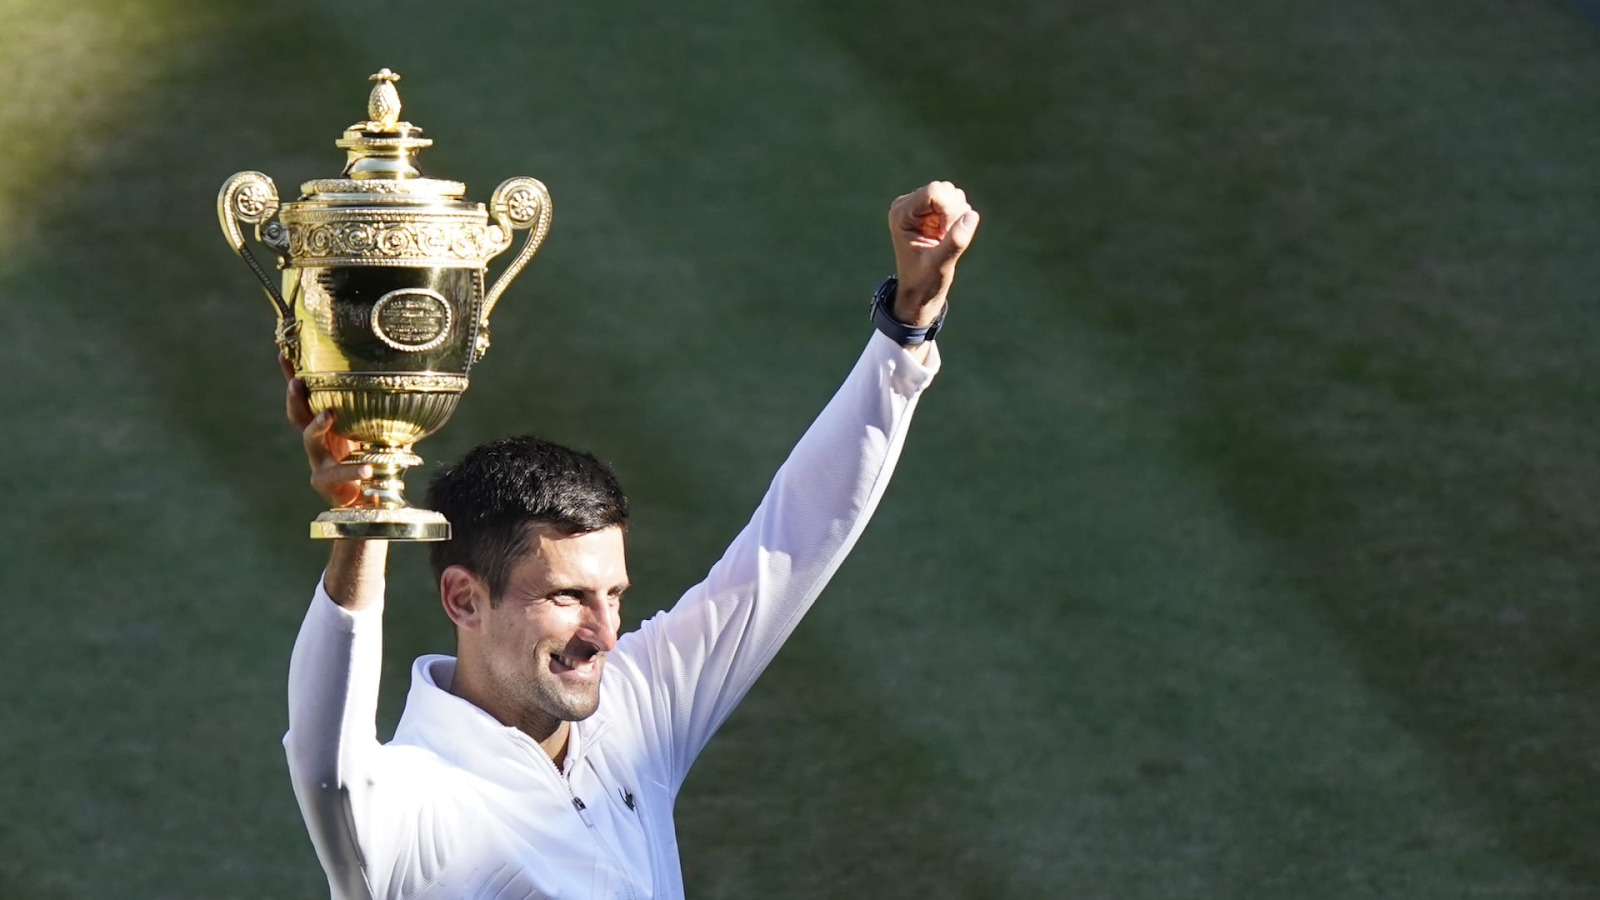 DJOKOVIC TOPS KYRGIOS FOR 7TH WIMBLEDON, 21ST SLAM TROPHY. Waiting for something, Novak Djokovic. Waiting for Nick Kyrgios to become distracted and disoriented.